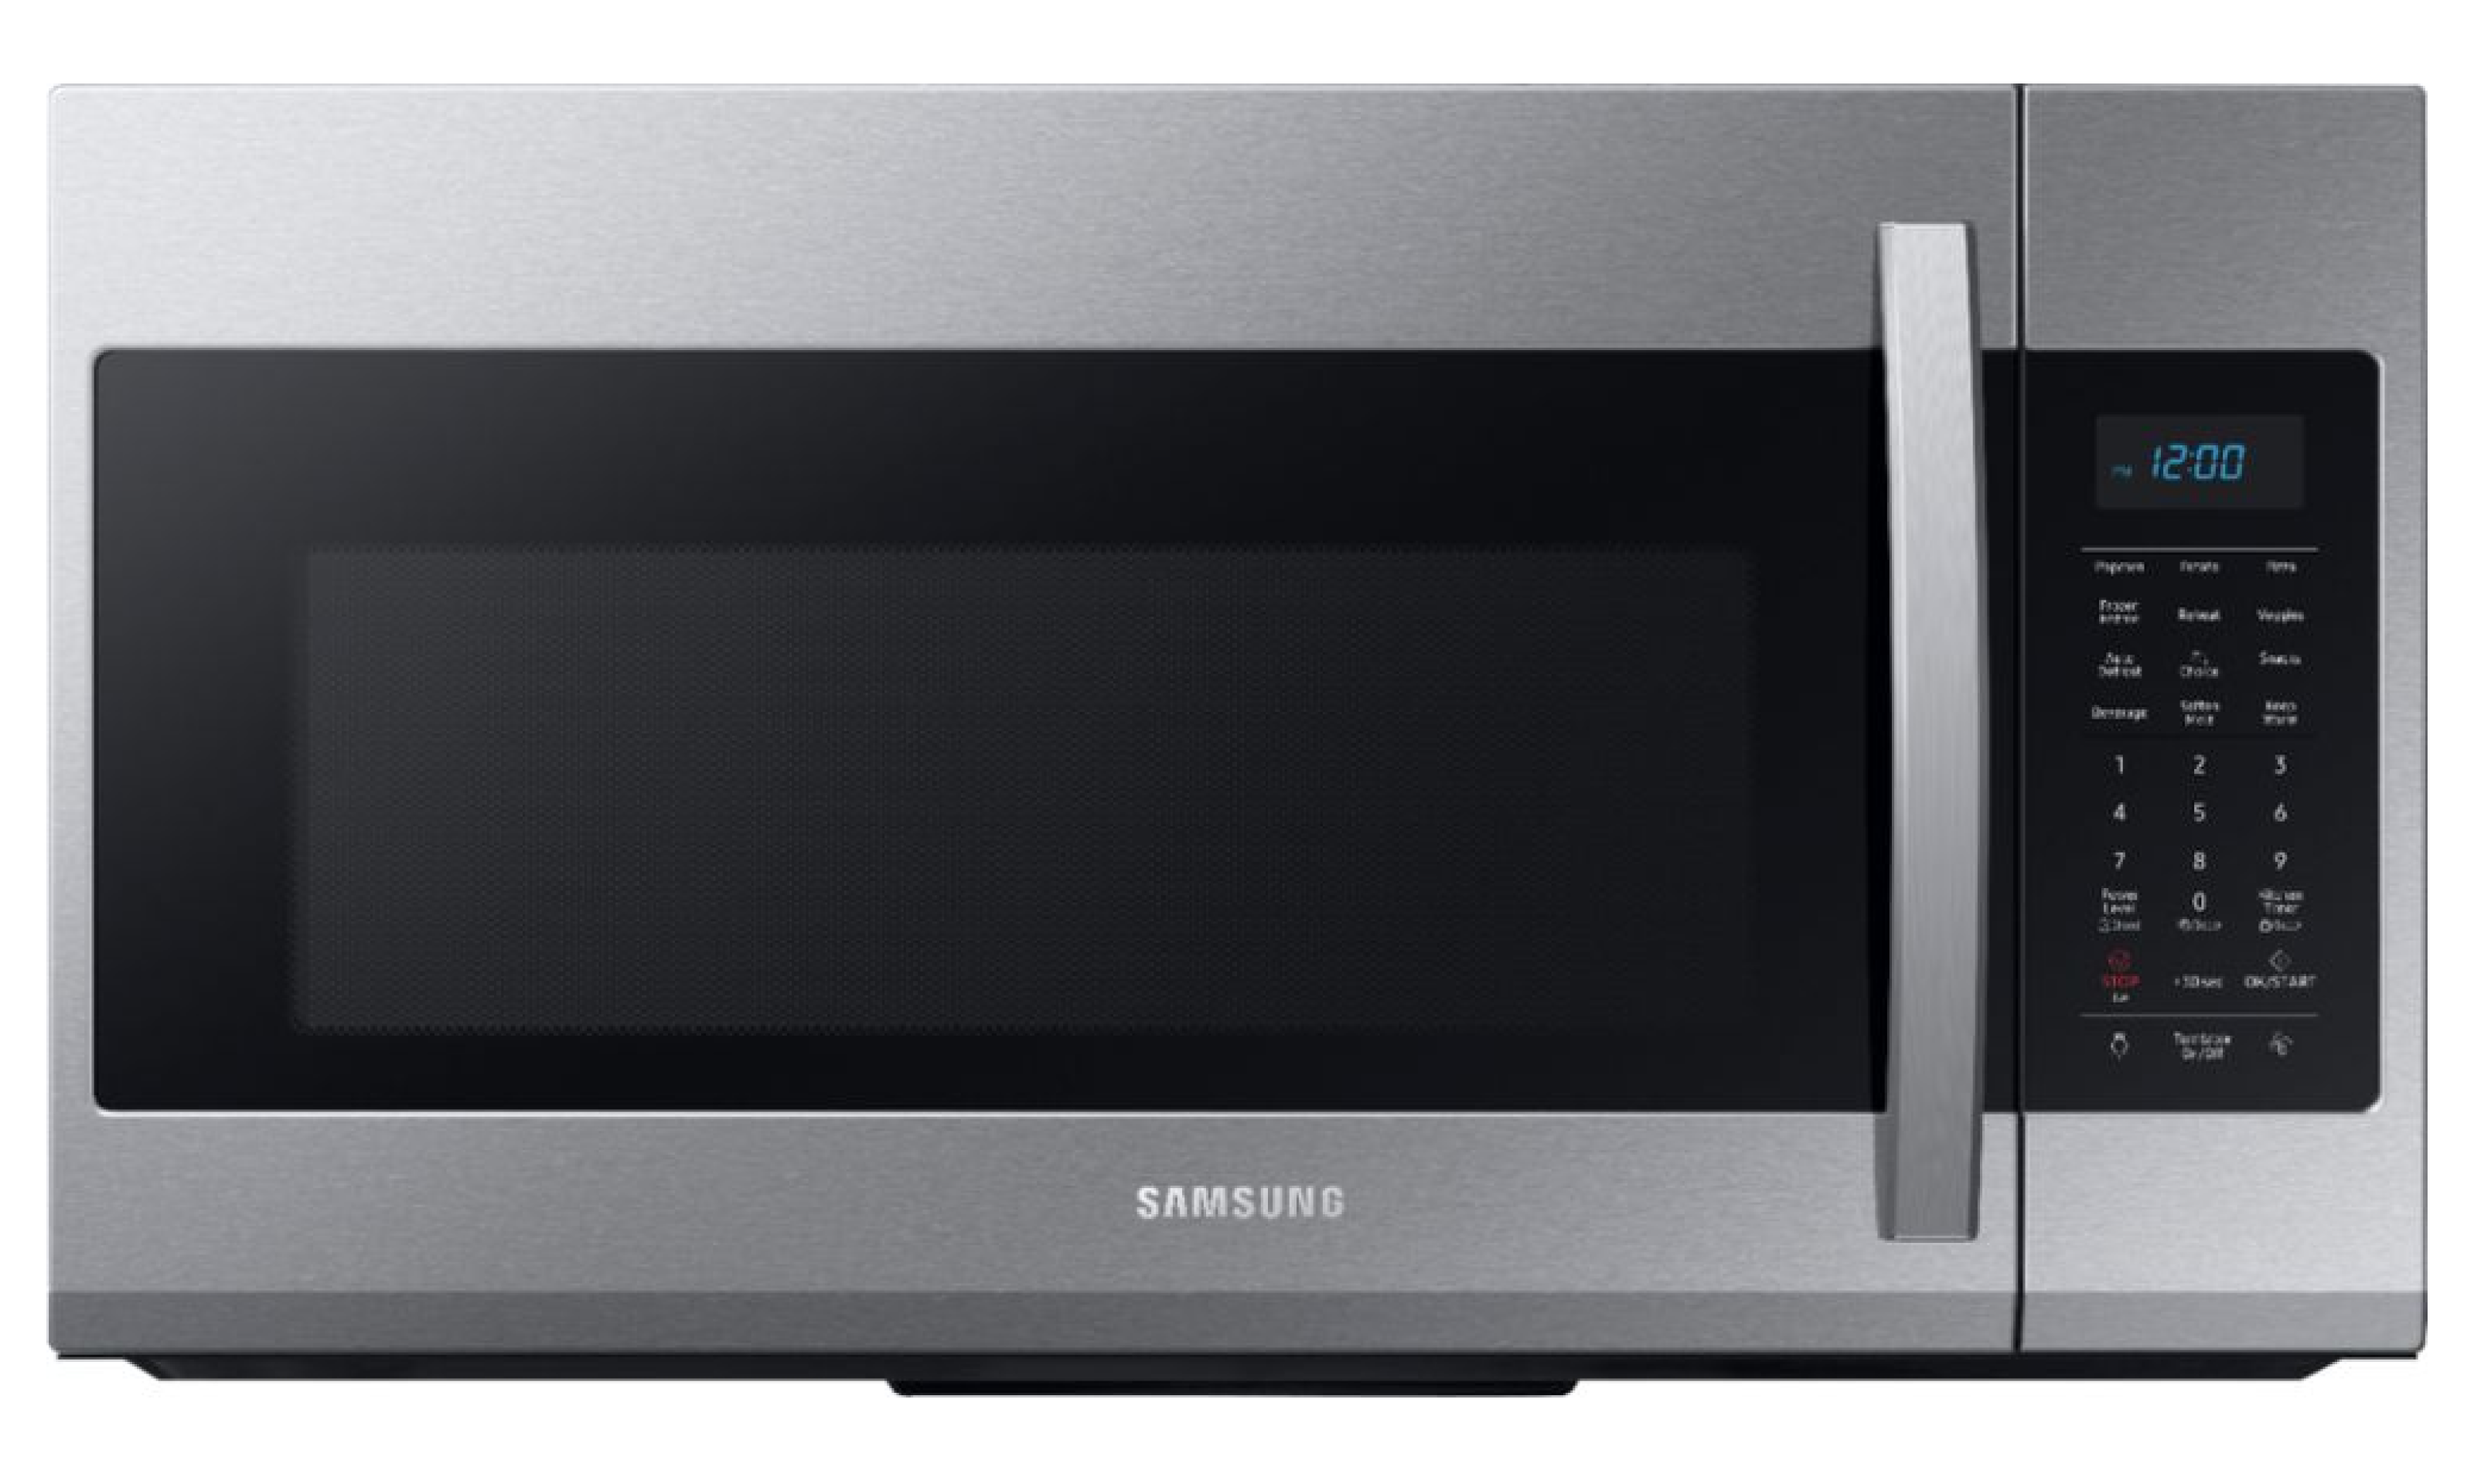 Samsung 1.9 Cu. Ft. Over-the-Range Microwave with Sensor Cook - Stainless steel - ME19R7041FS